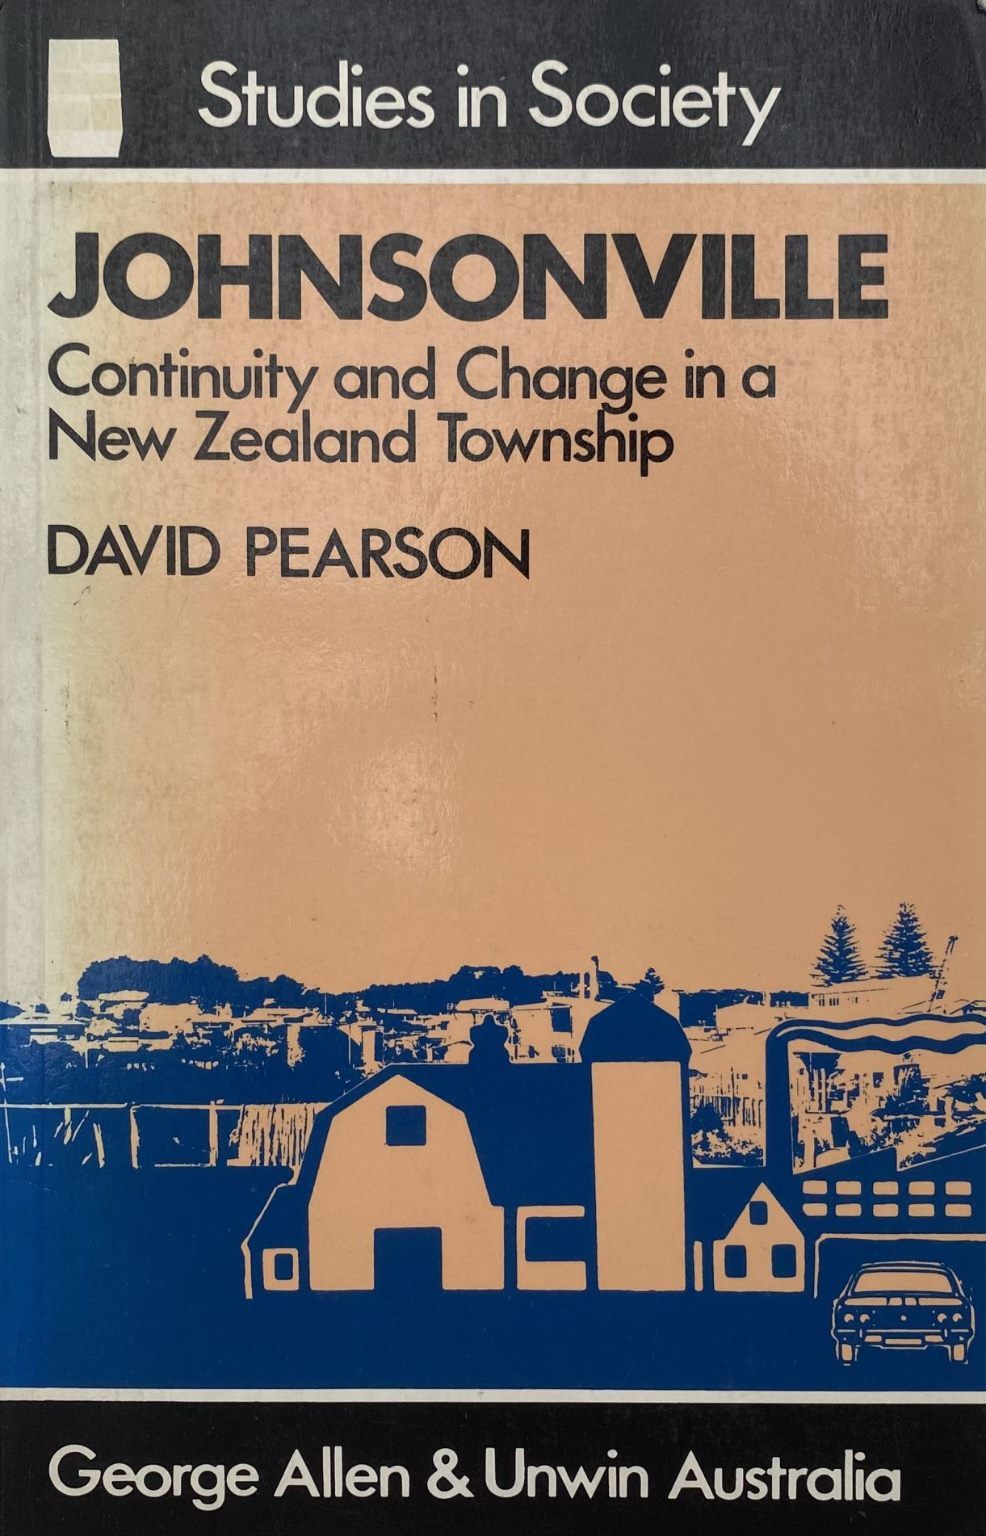 JOHNSONVILLE: Continuity and Change in a New Zealand Township